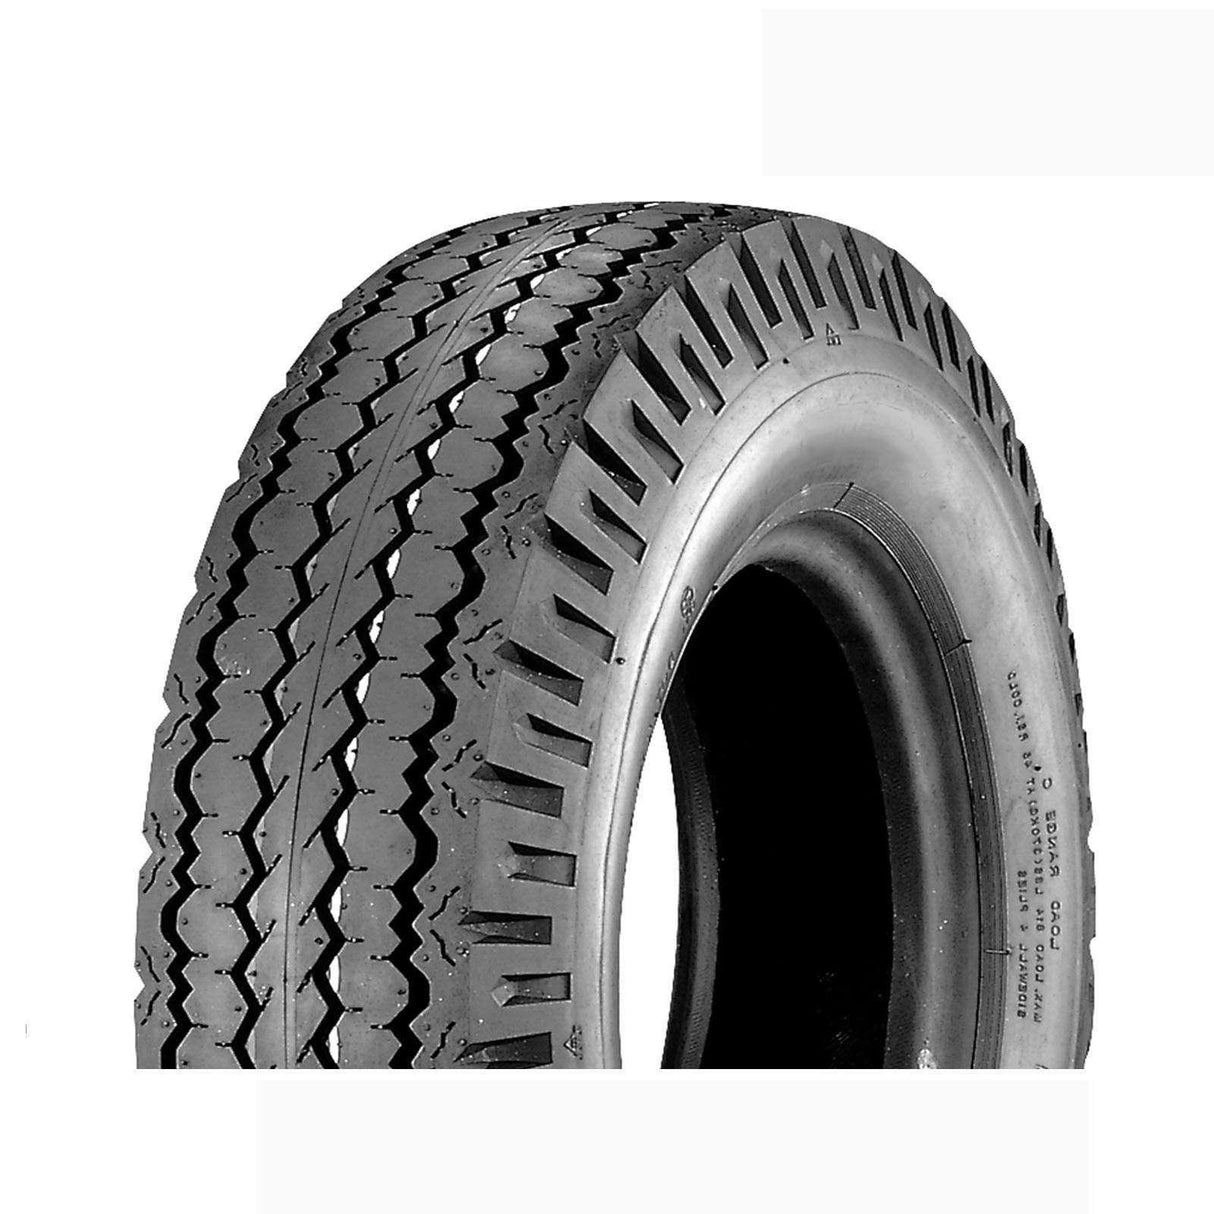 4.50-10 K364 (6 PLY) Kenda Highway Tyre and Tube